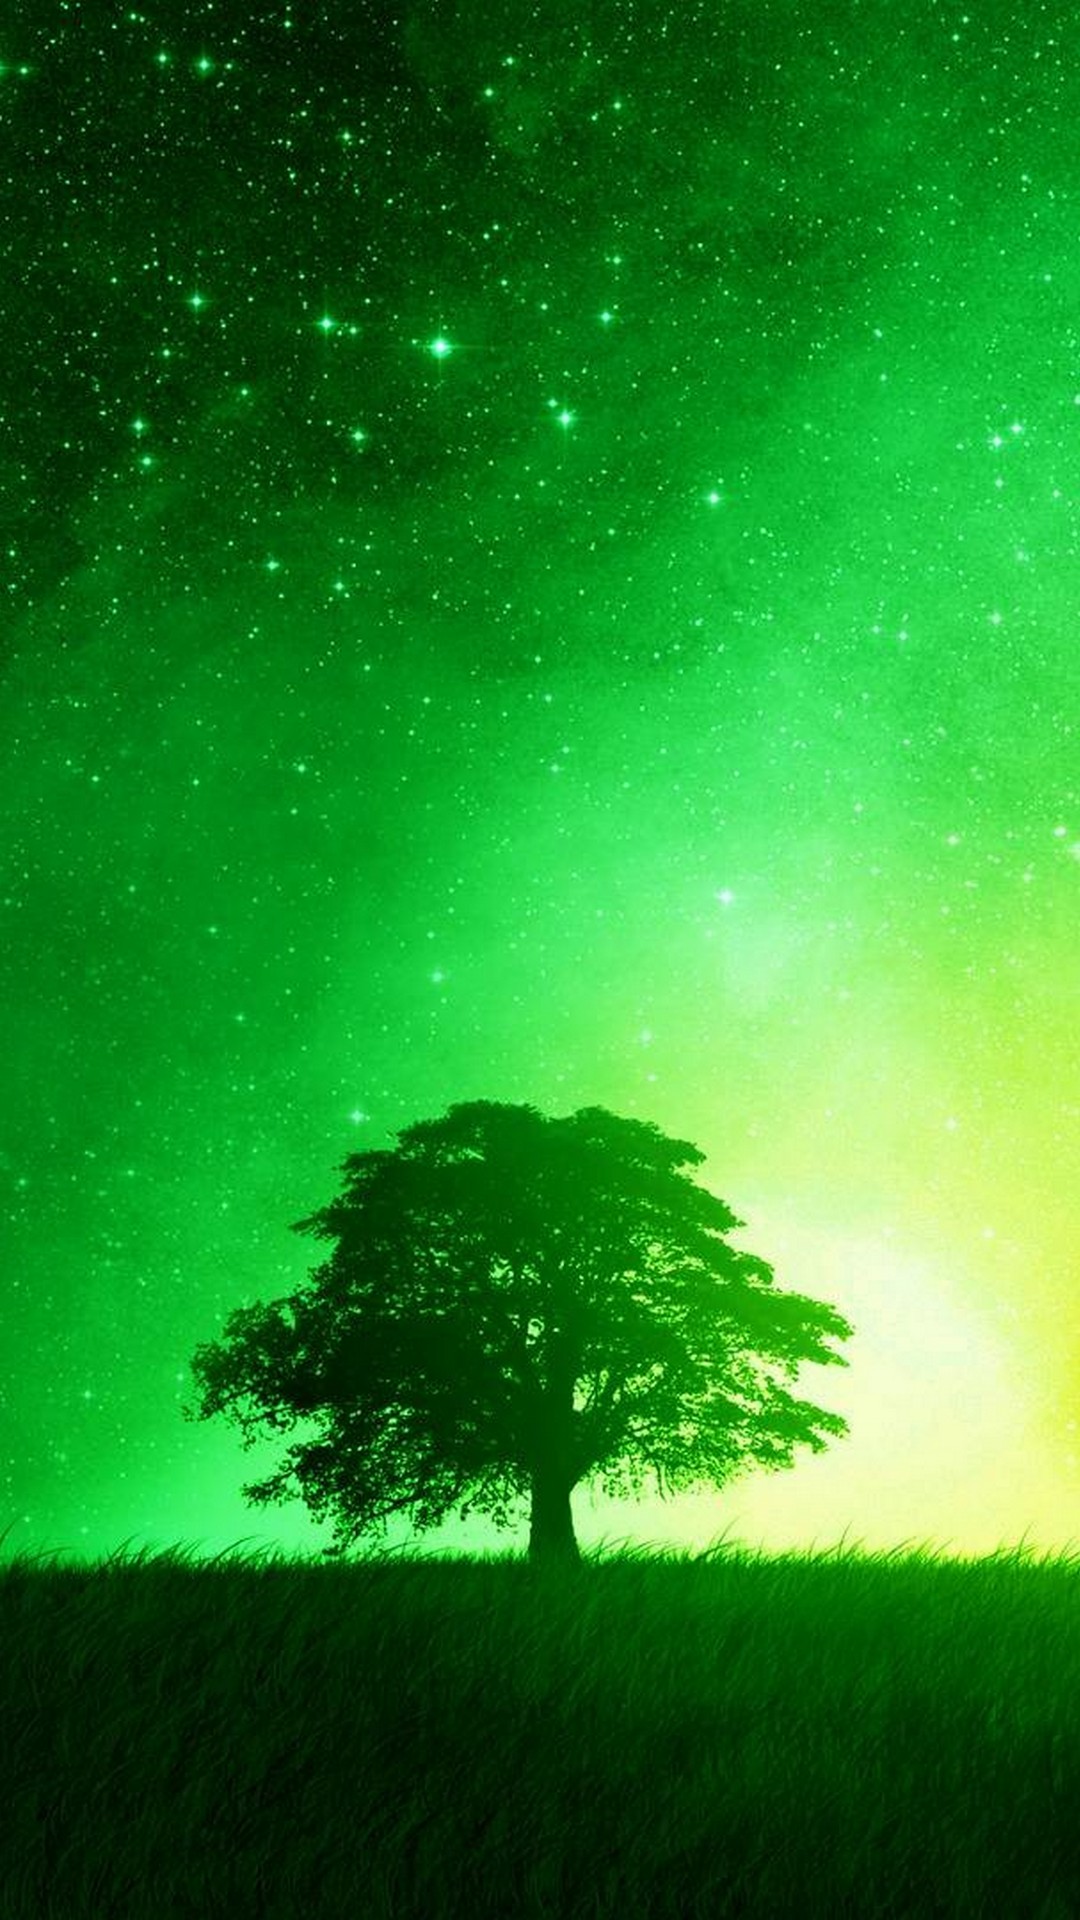 iPhone X Wallpaper Nature Green with image resolution 1080x1920 pixel. You can make this wallpaper for your iPhone 5, 6, 7, 8, X backgrounds, Mobile Screensaver, or iPad Lock Screen